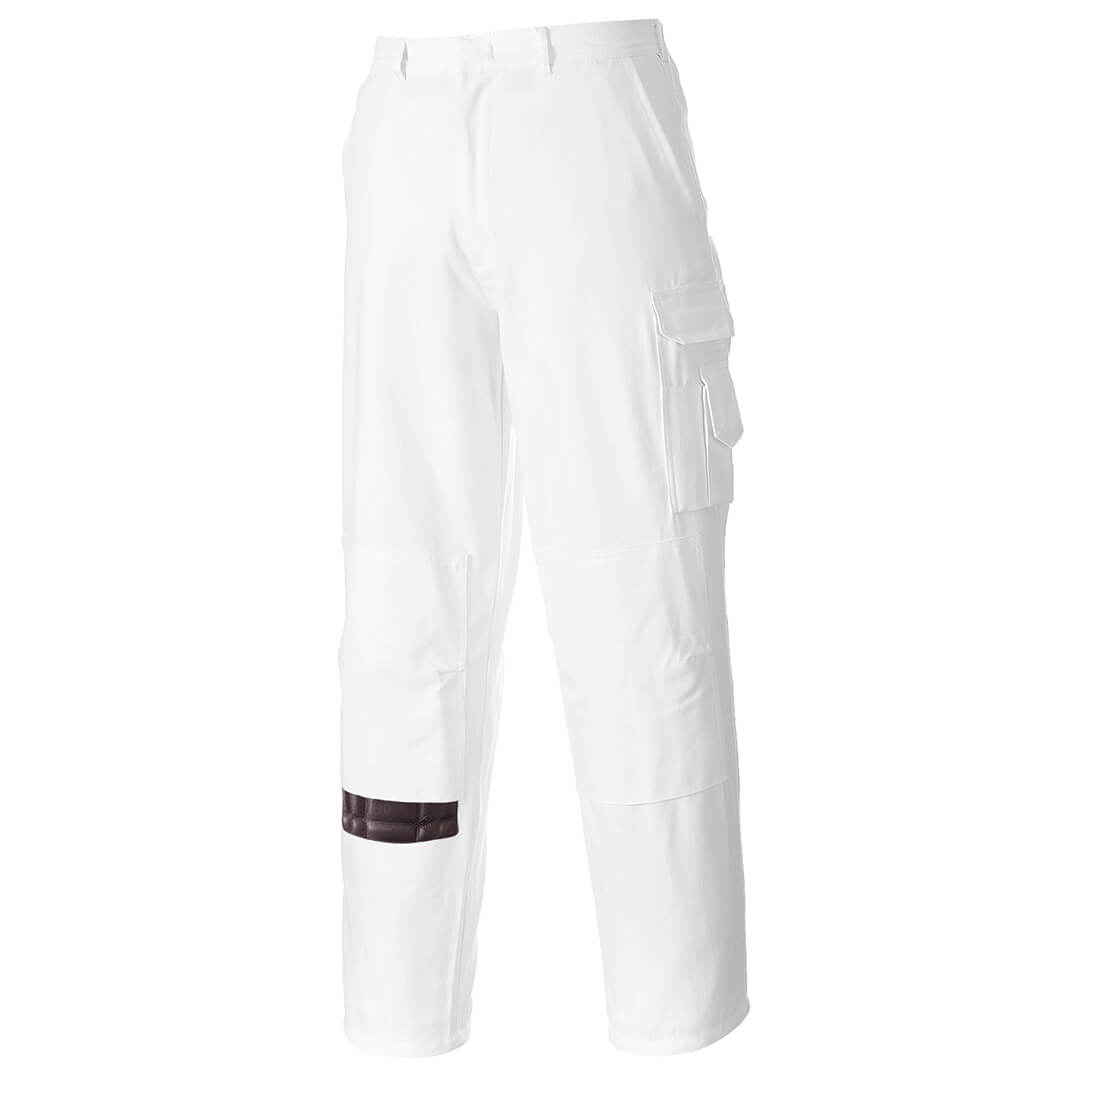 Image of Portwest Painters Trousers White 3XL 33"